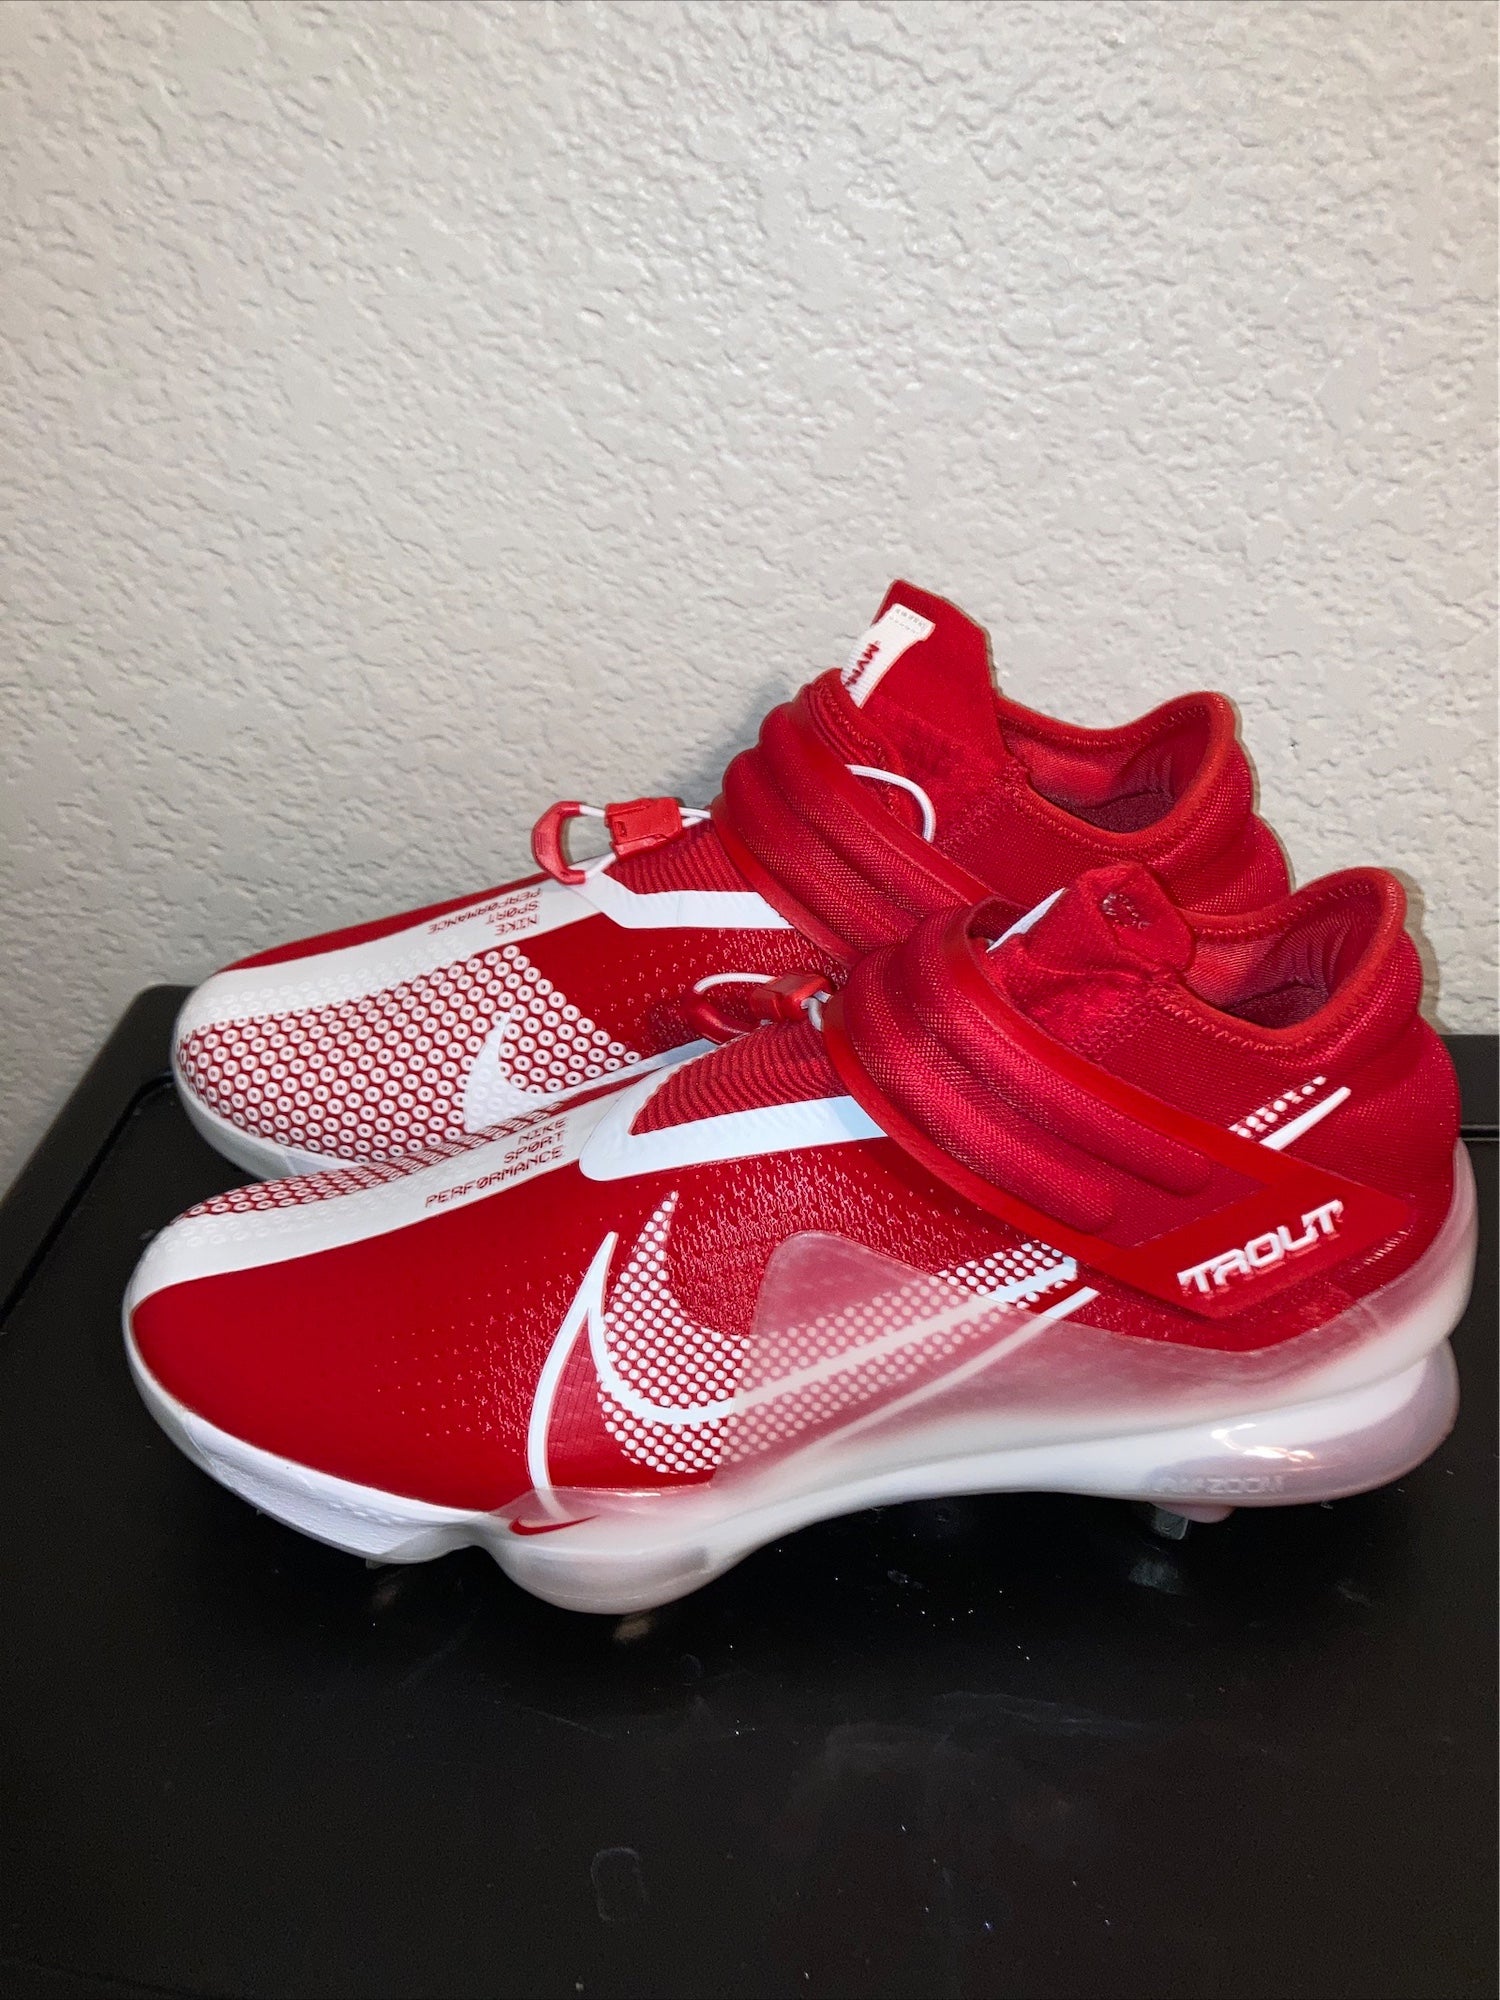 Nike Force Zoom Mike Trout 7 Red/White Baseball Cleats Size Mens 12.5  CQ7224 602